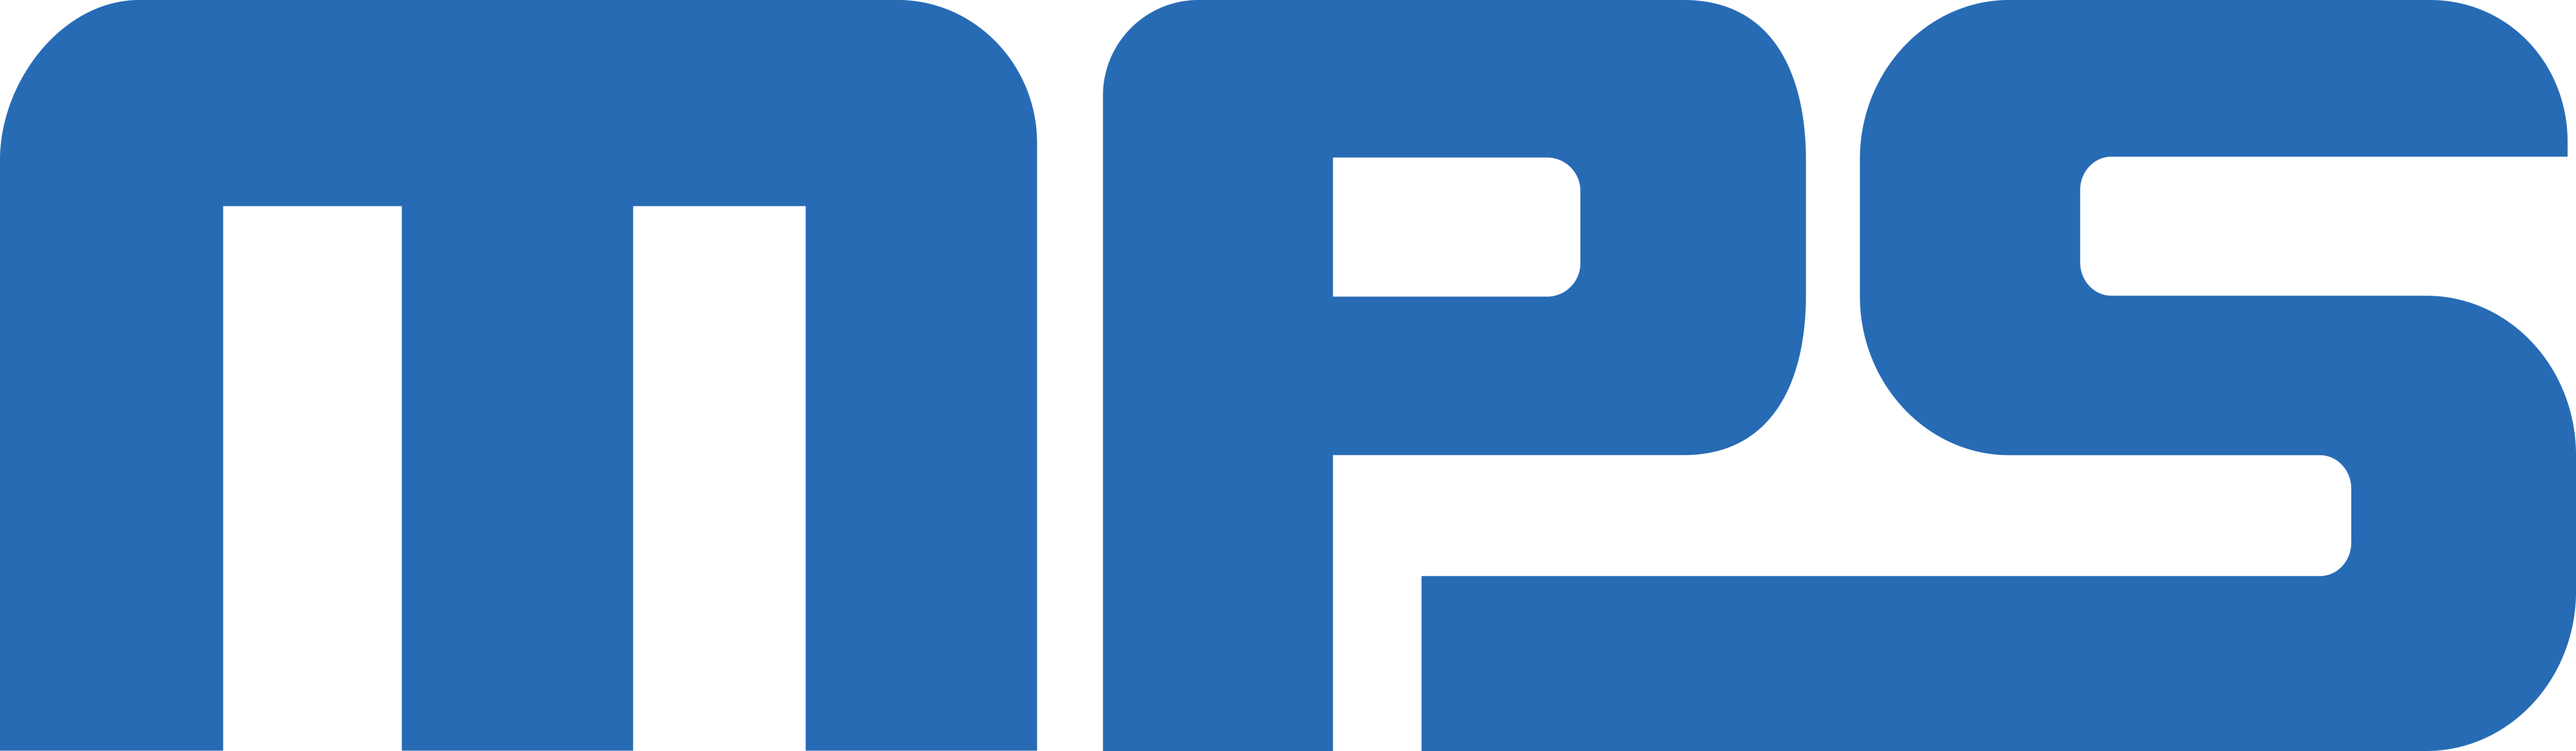 MPS (Monolithic Power Systems) LOGO